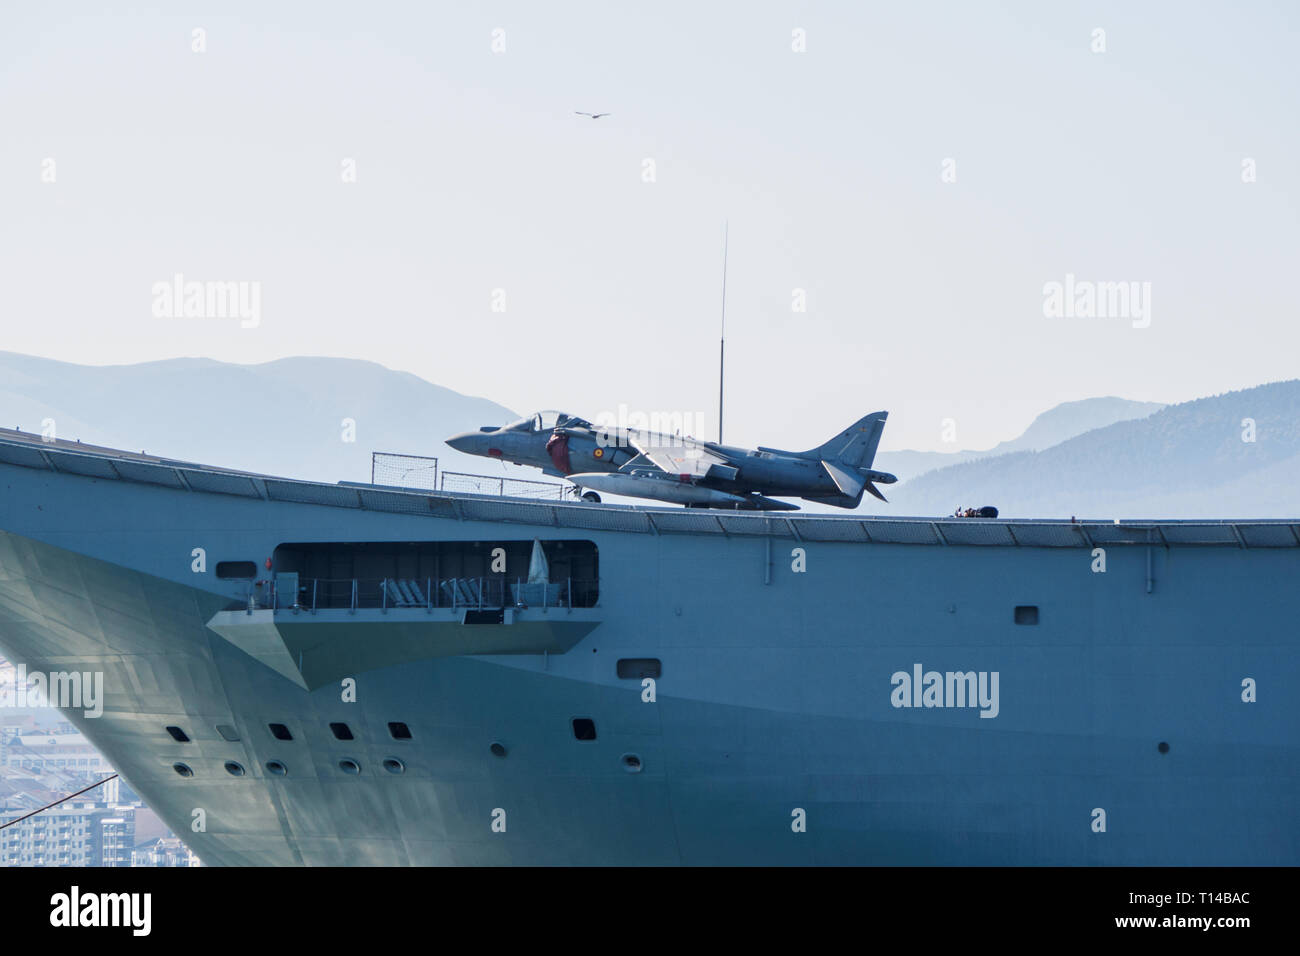 BILBAO, SPAIN - MARCH / 23/2019. The aircraft carrier of the Spanish Navy Juan Carlos I in the port of Bilbao, open day to visit the ship. Sunny day Stock Photo